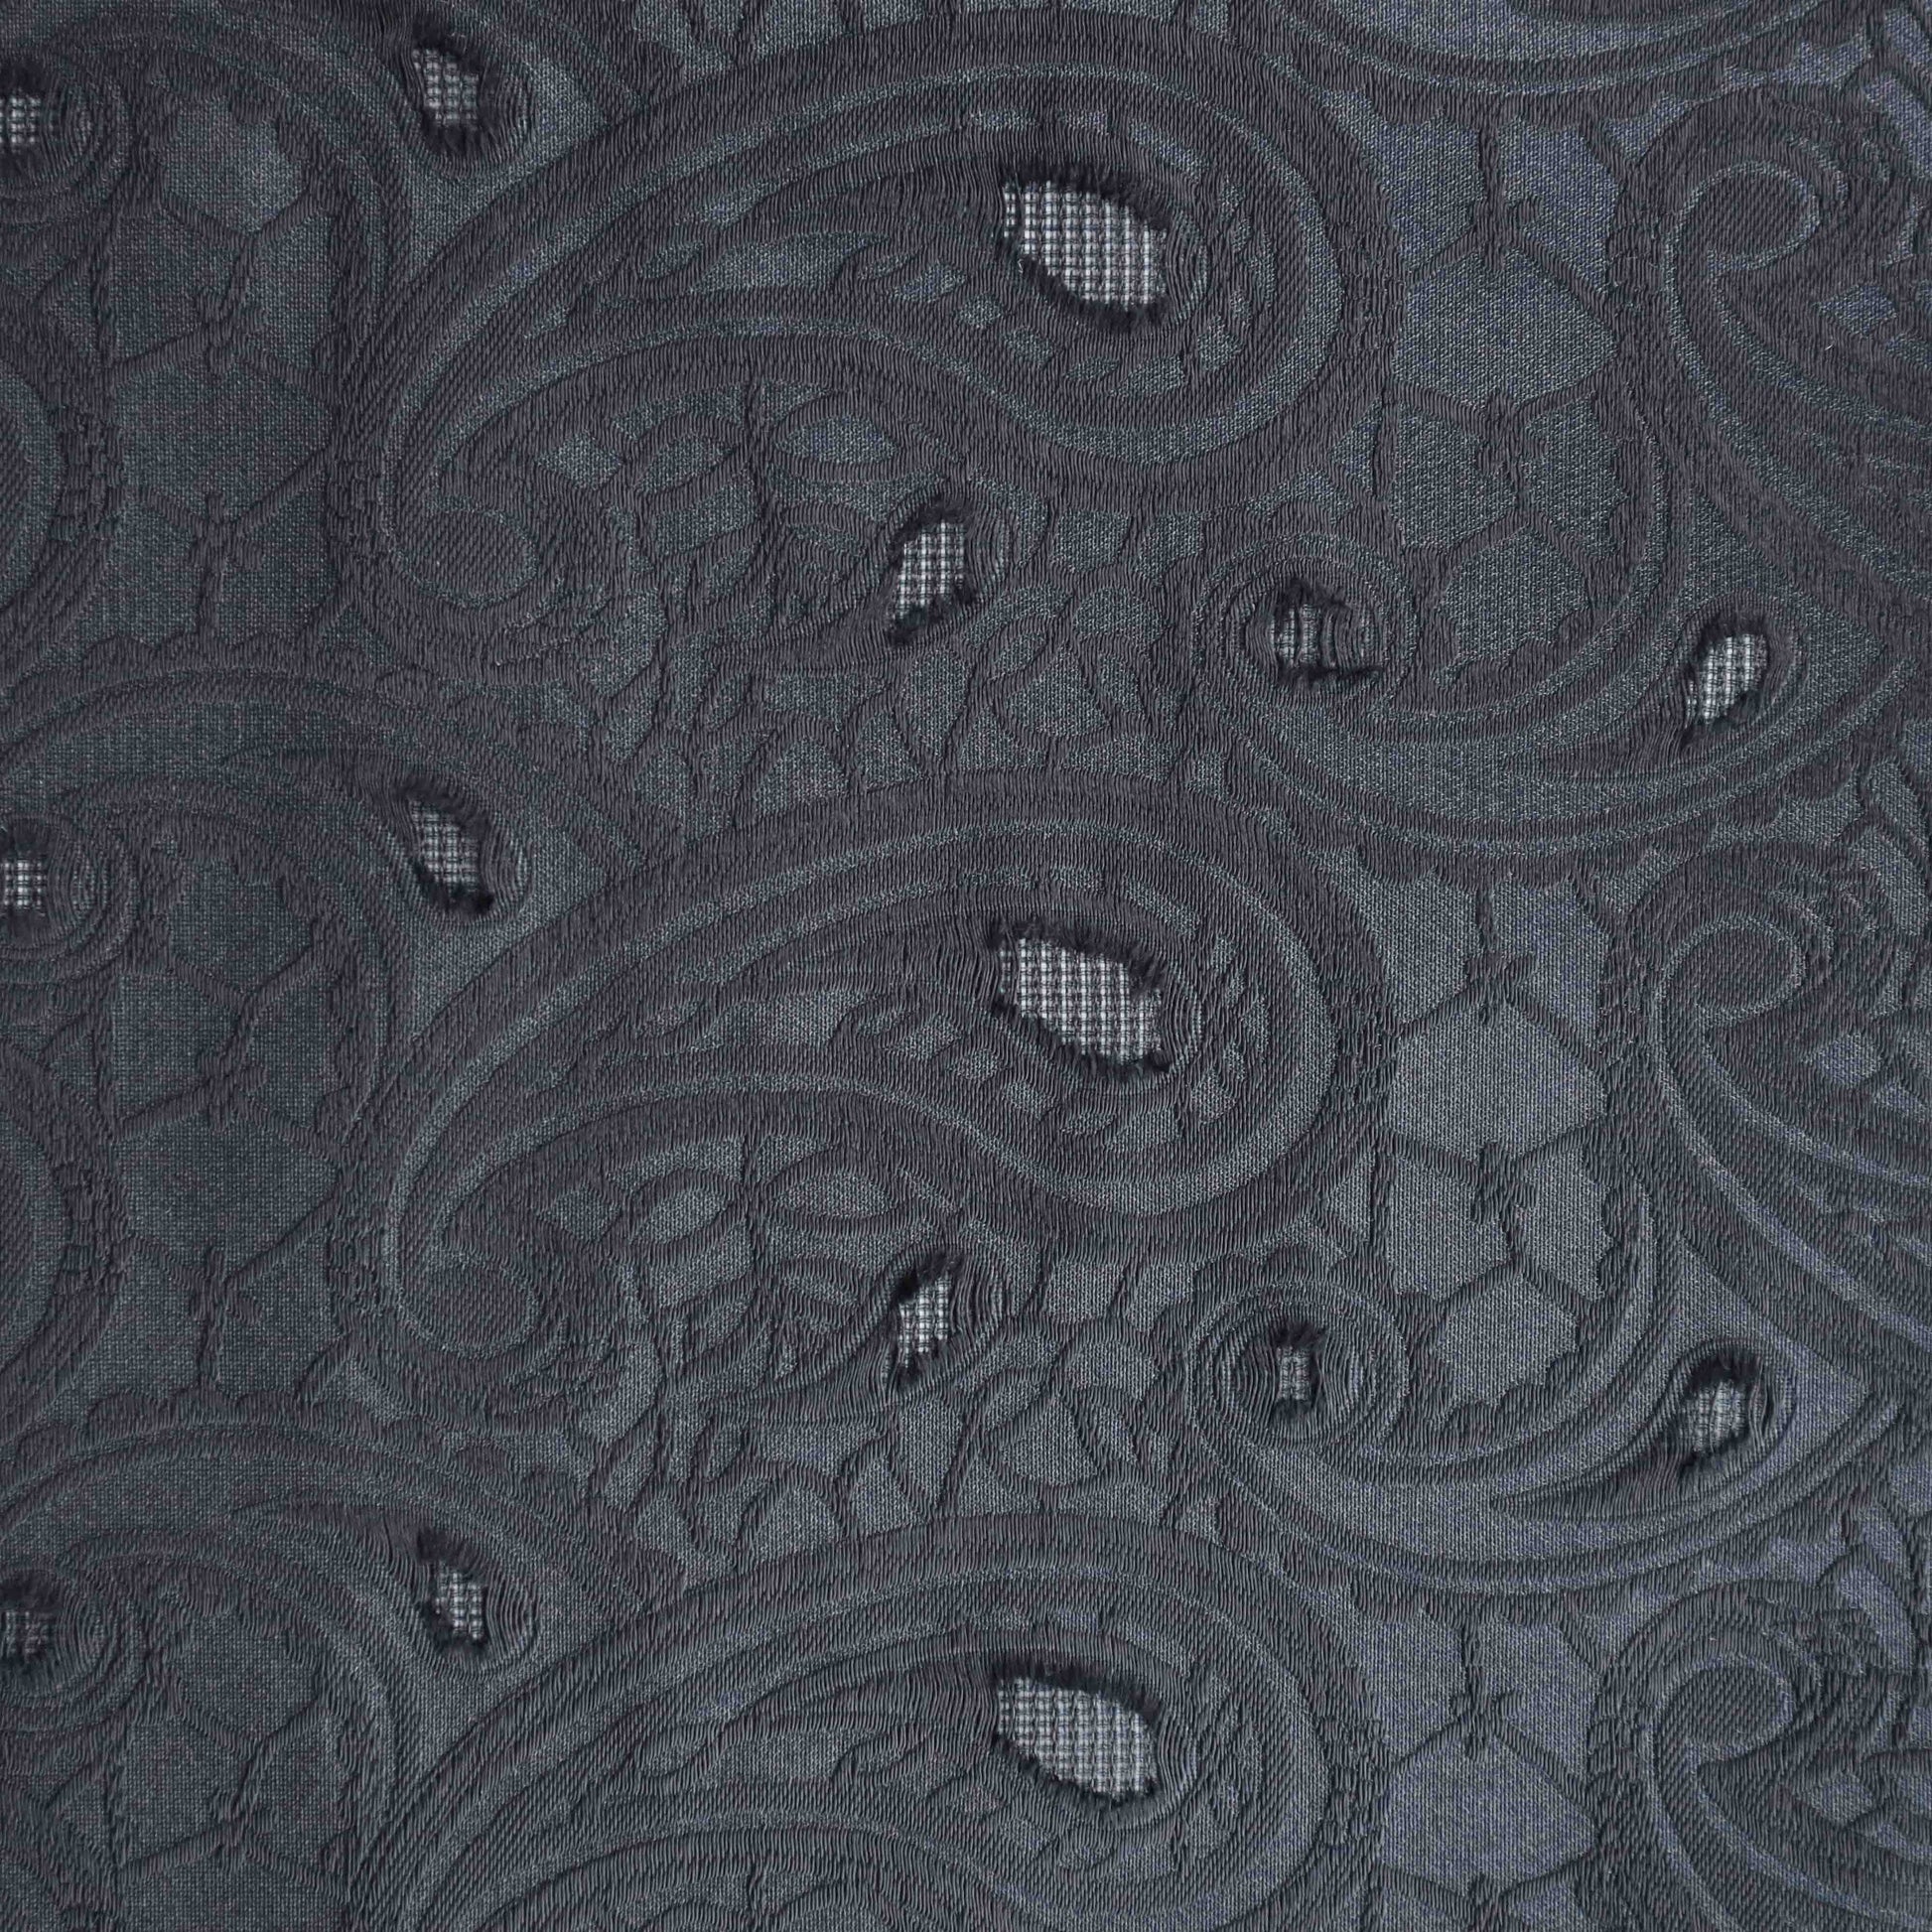 An European-made lightweight jacquard in Black Batik. Featuring black paisley prints, It has an incredible drape, a smooth, cool hand feel and with subtle stretch.